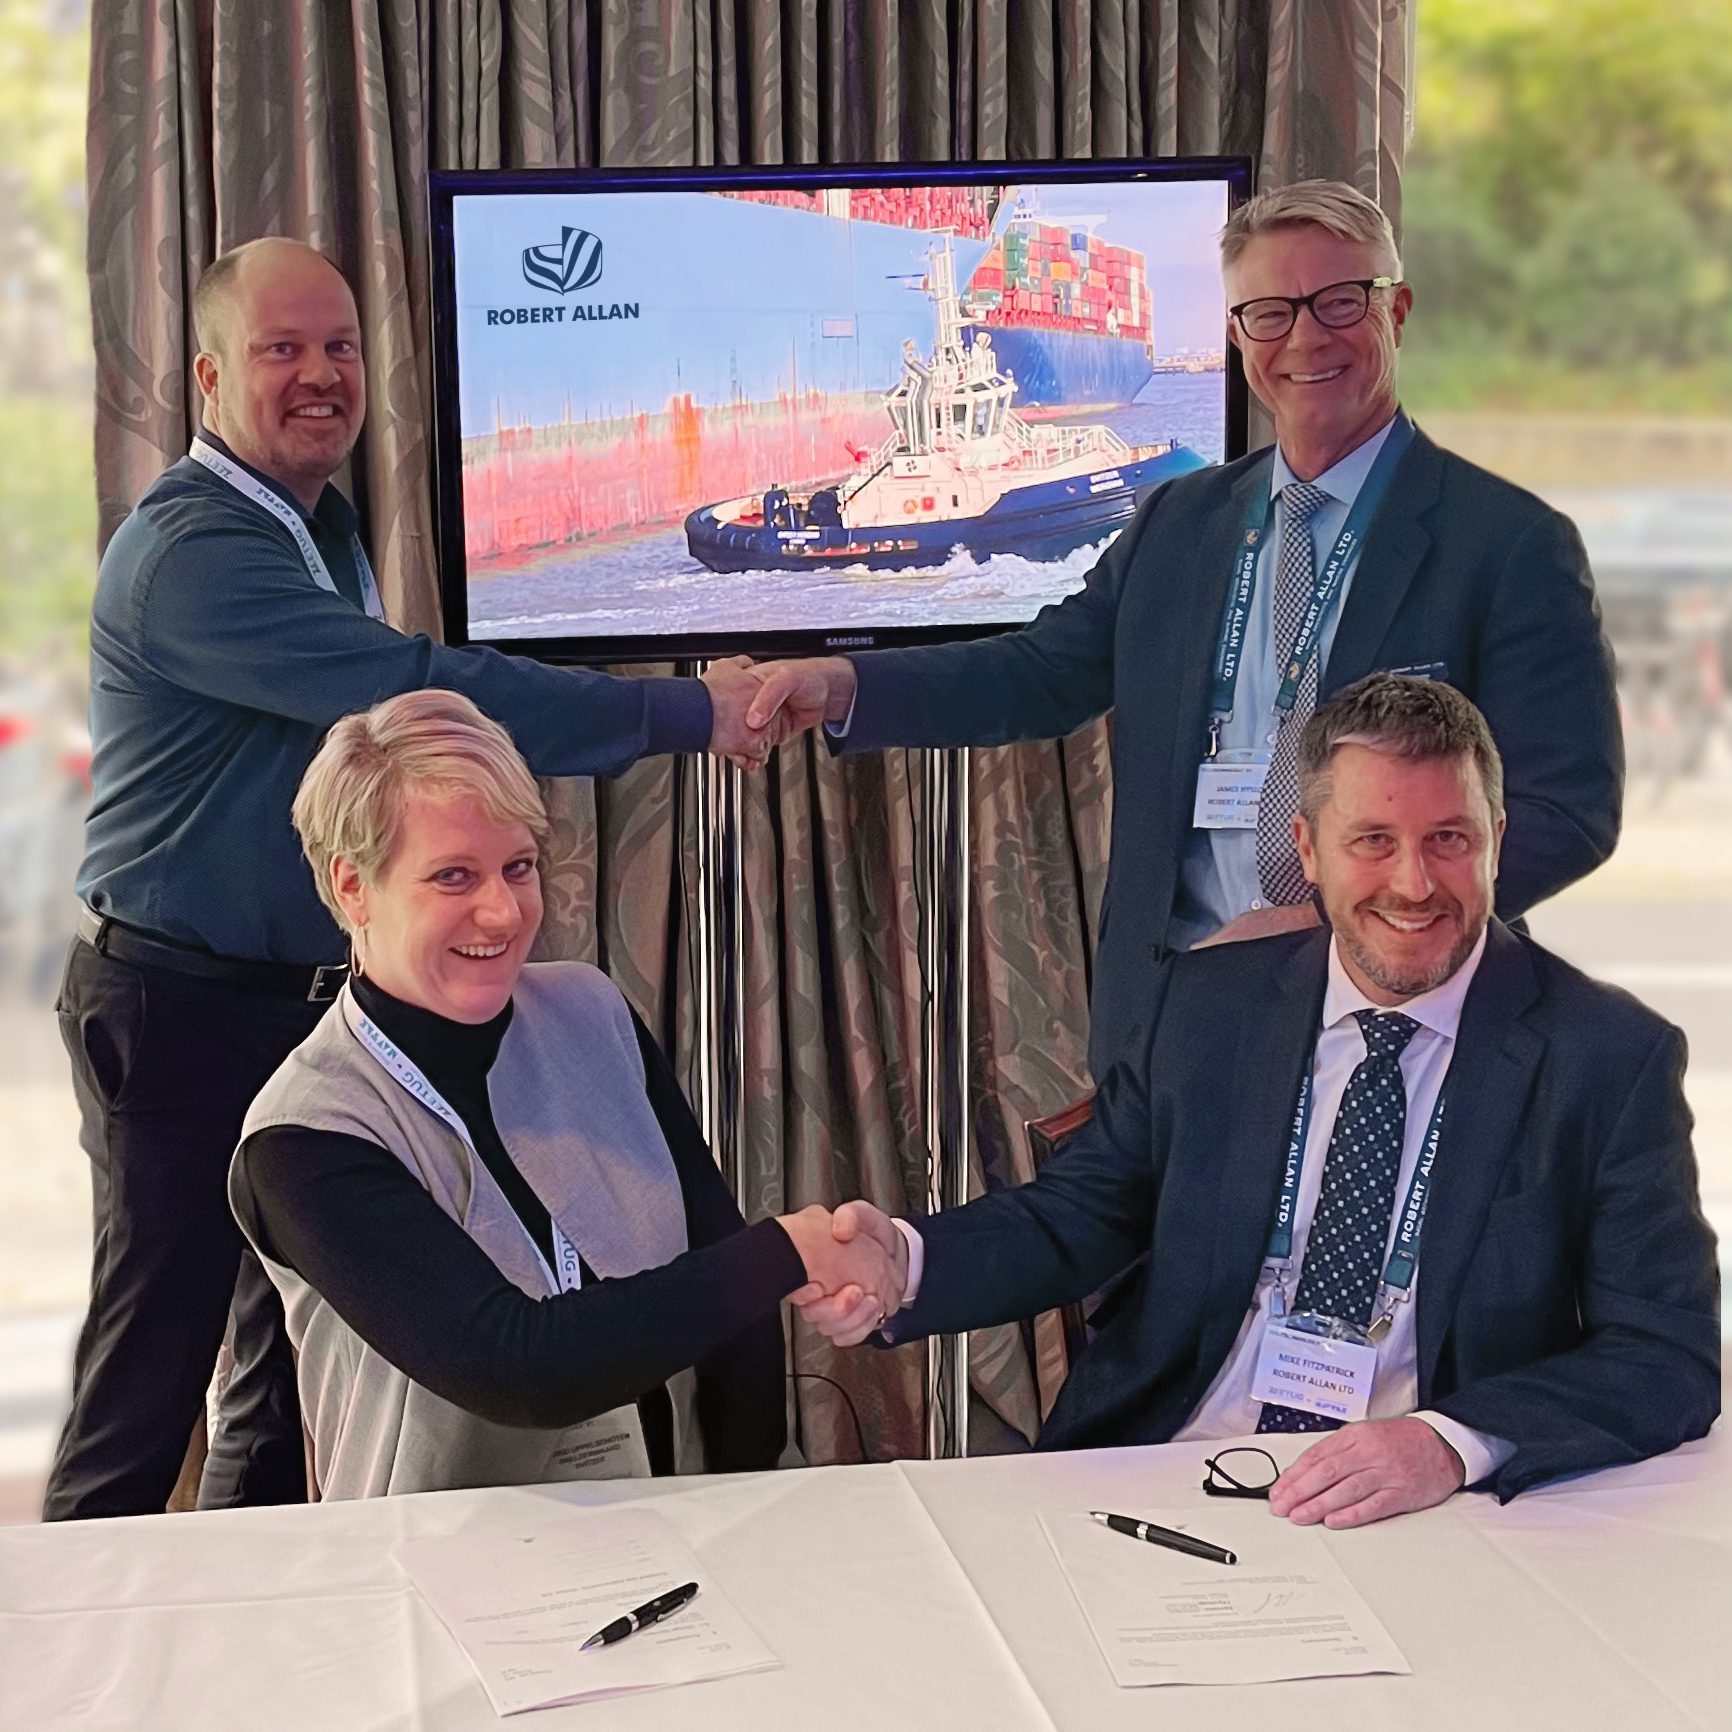 Robert Allan and Svitzer Sign a Major Agreement Aimed at Reducing Tug Emissions